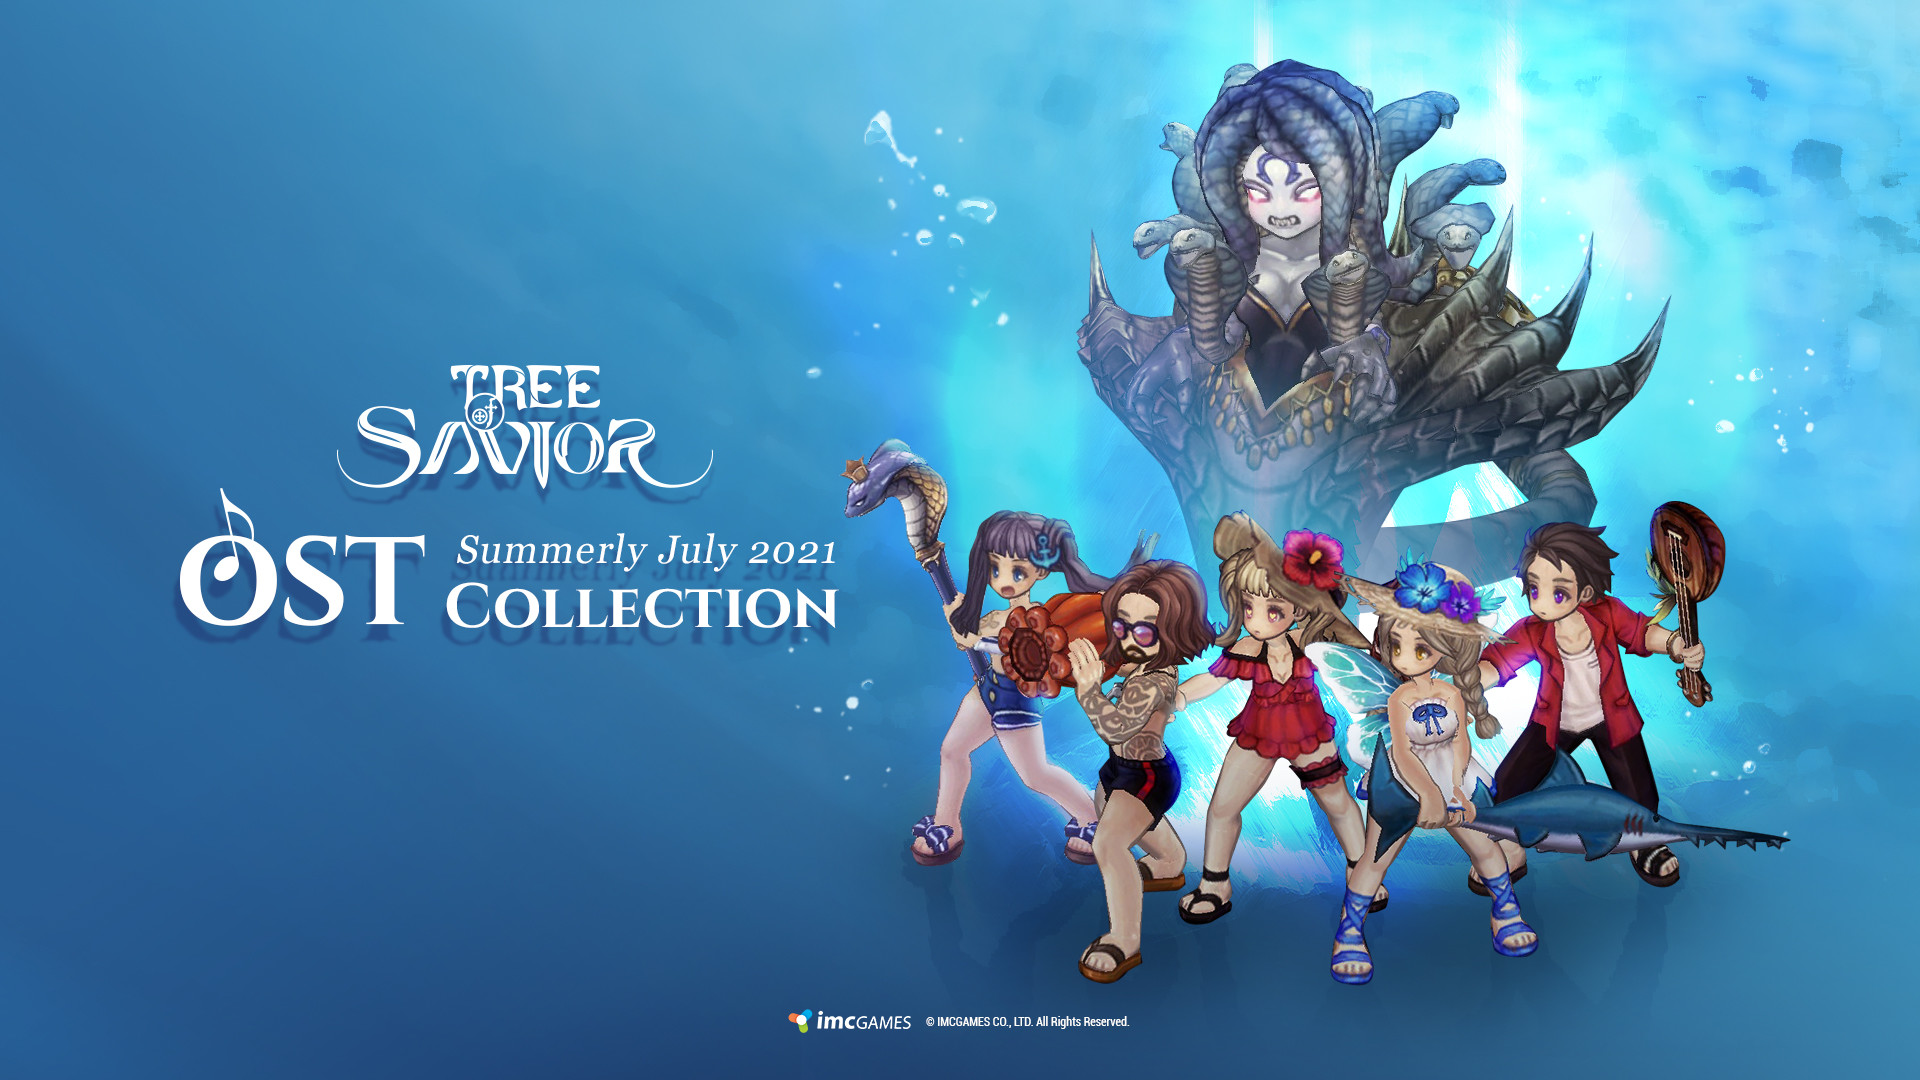 Tree of Savior - Summerly July 2021 OST Collection Featured Screenshot #1